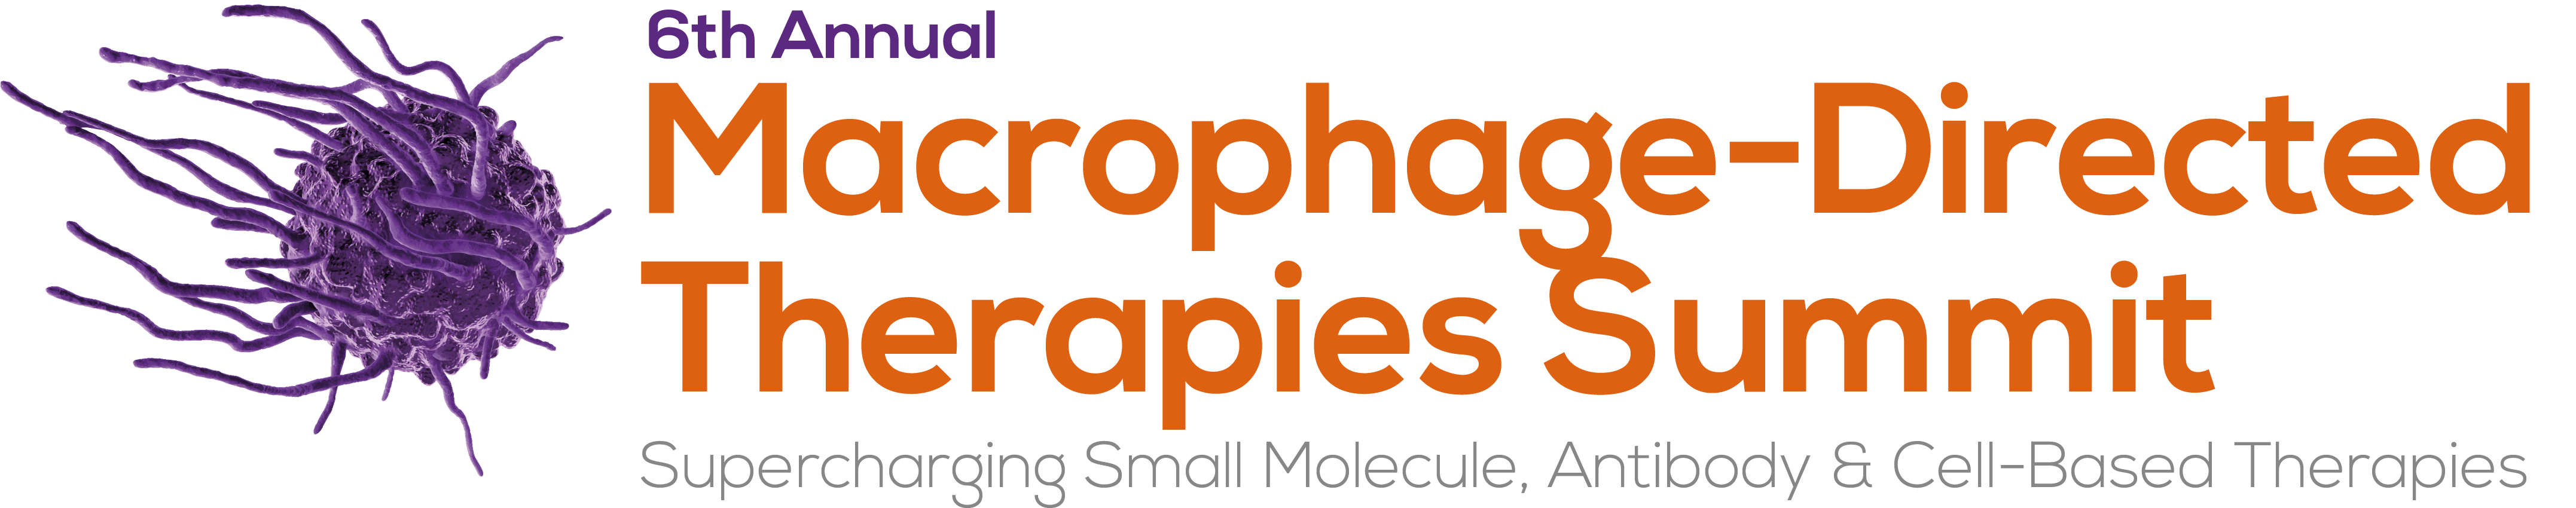 6th Annual Macrophage-Directed Therapies Summit